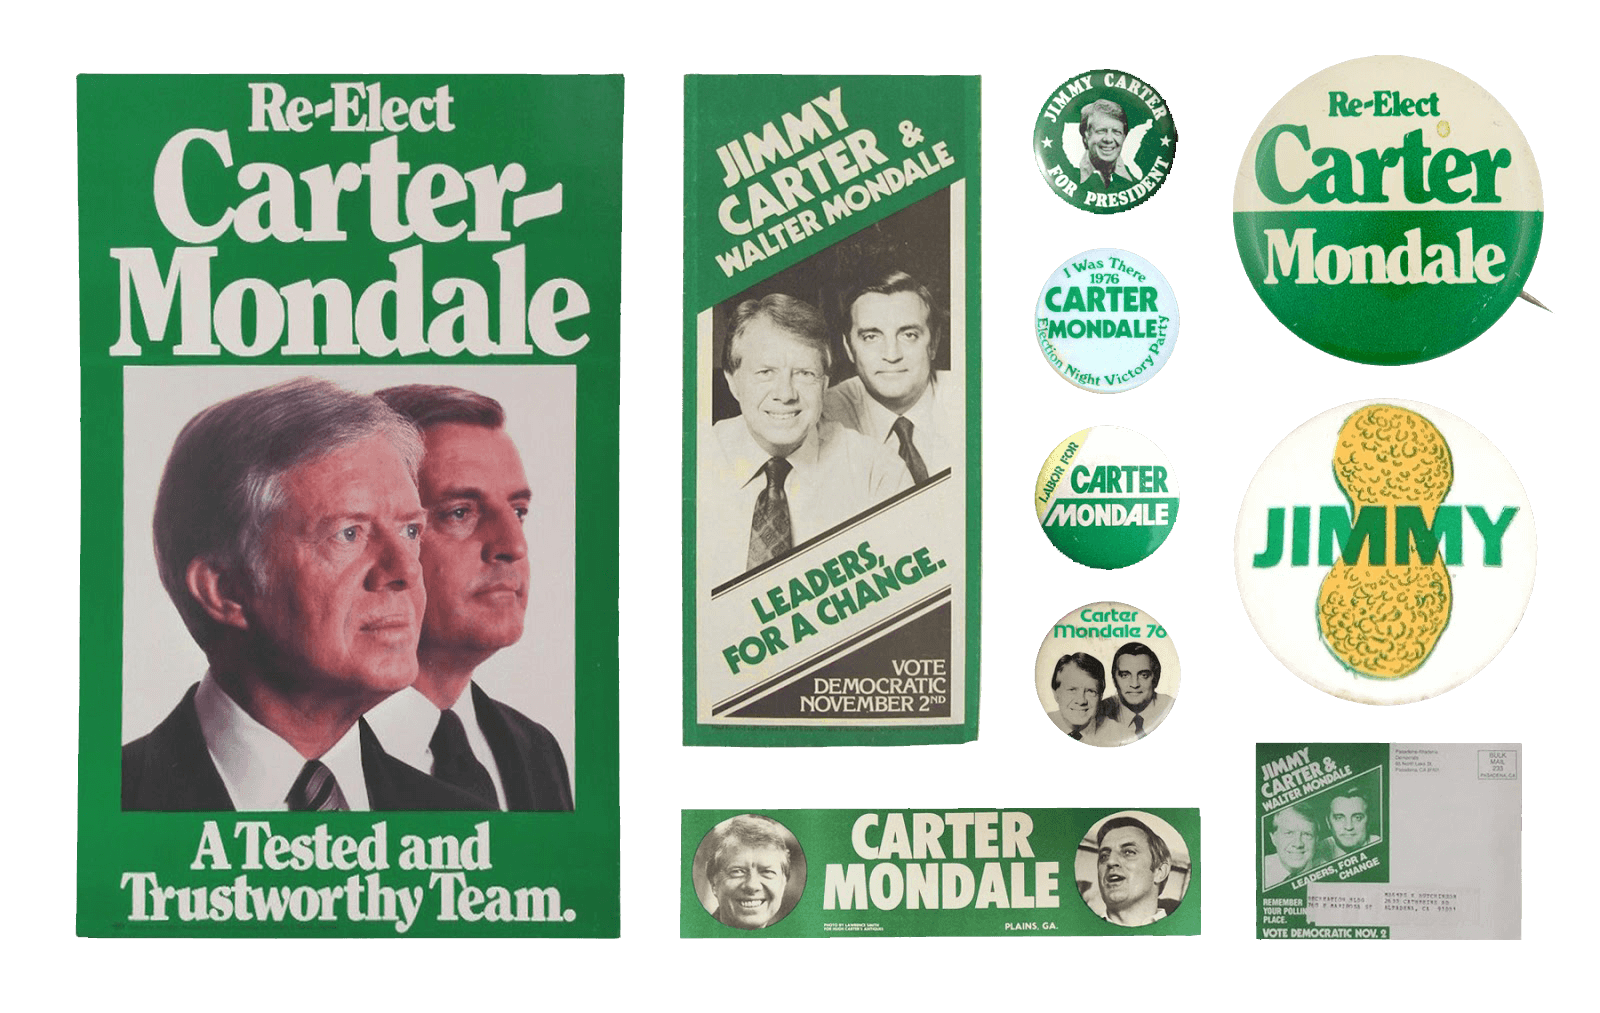 “Re-Elect Carter-Mondale” campaign visuals from 1980. “A Tested and Trustworthy Team.”